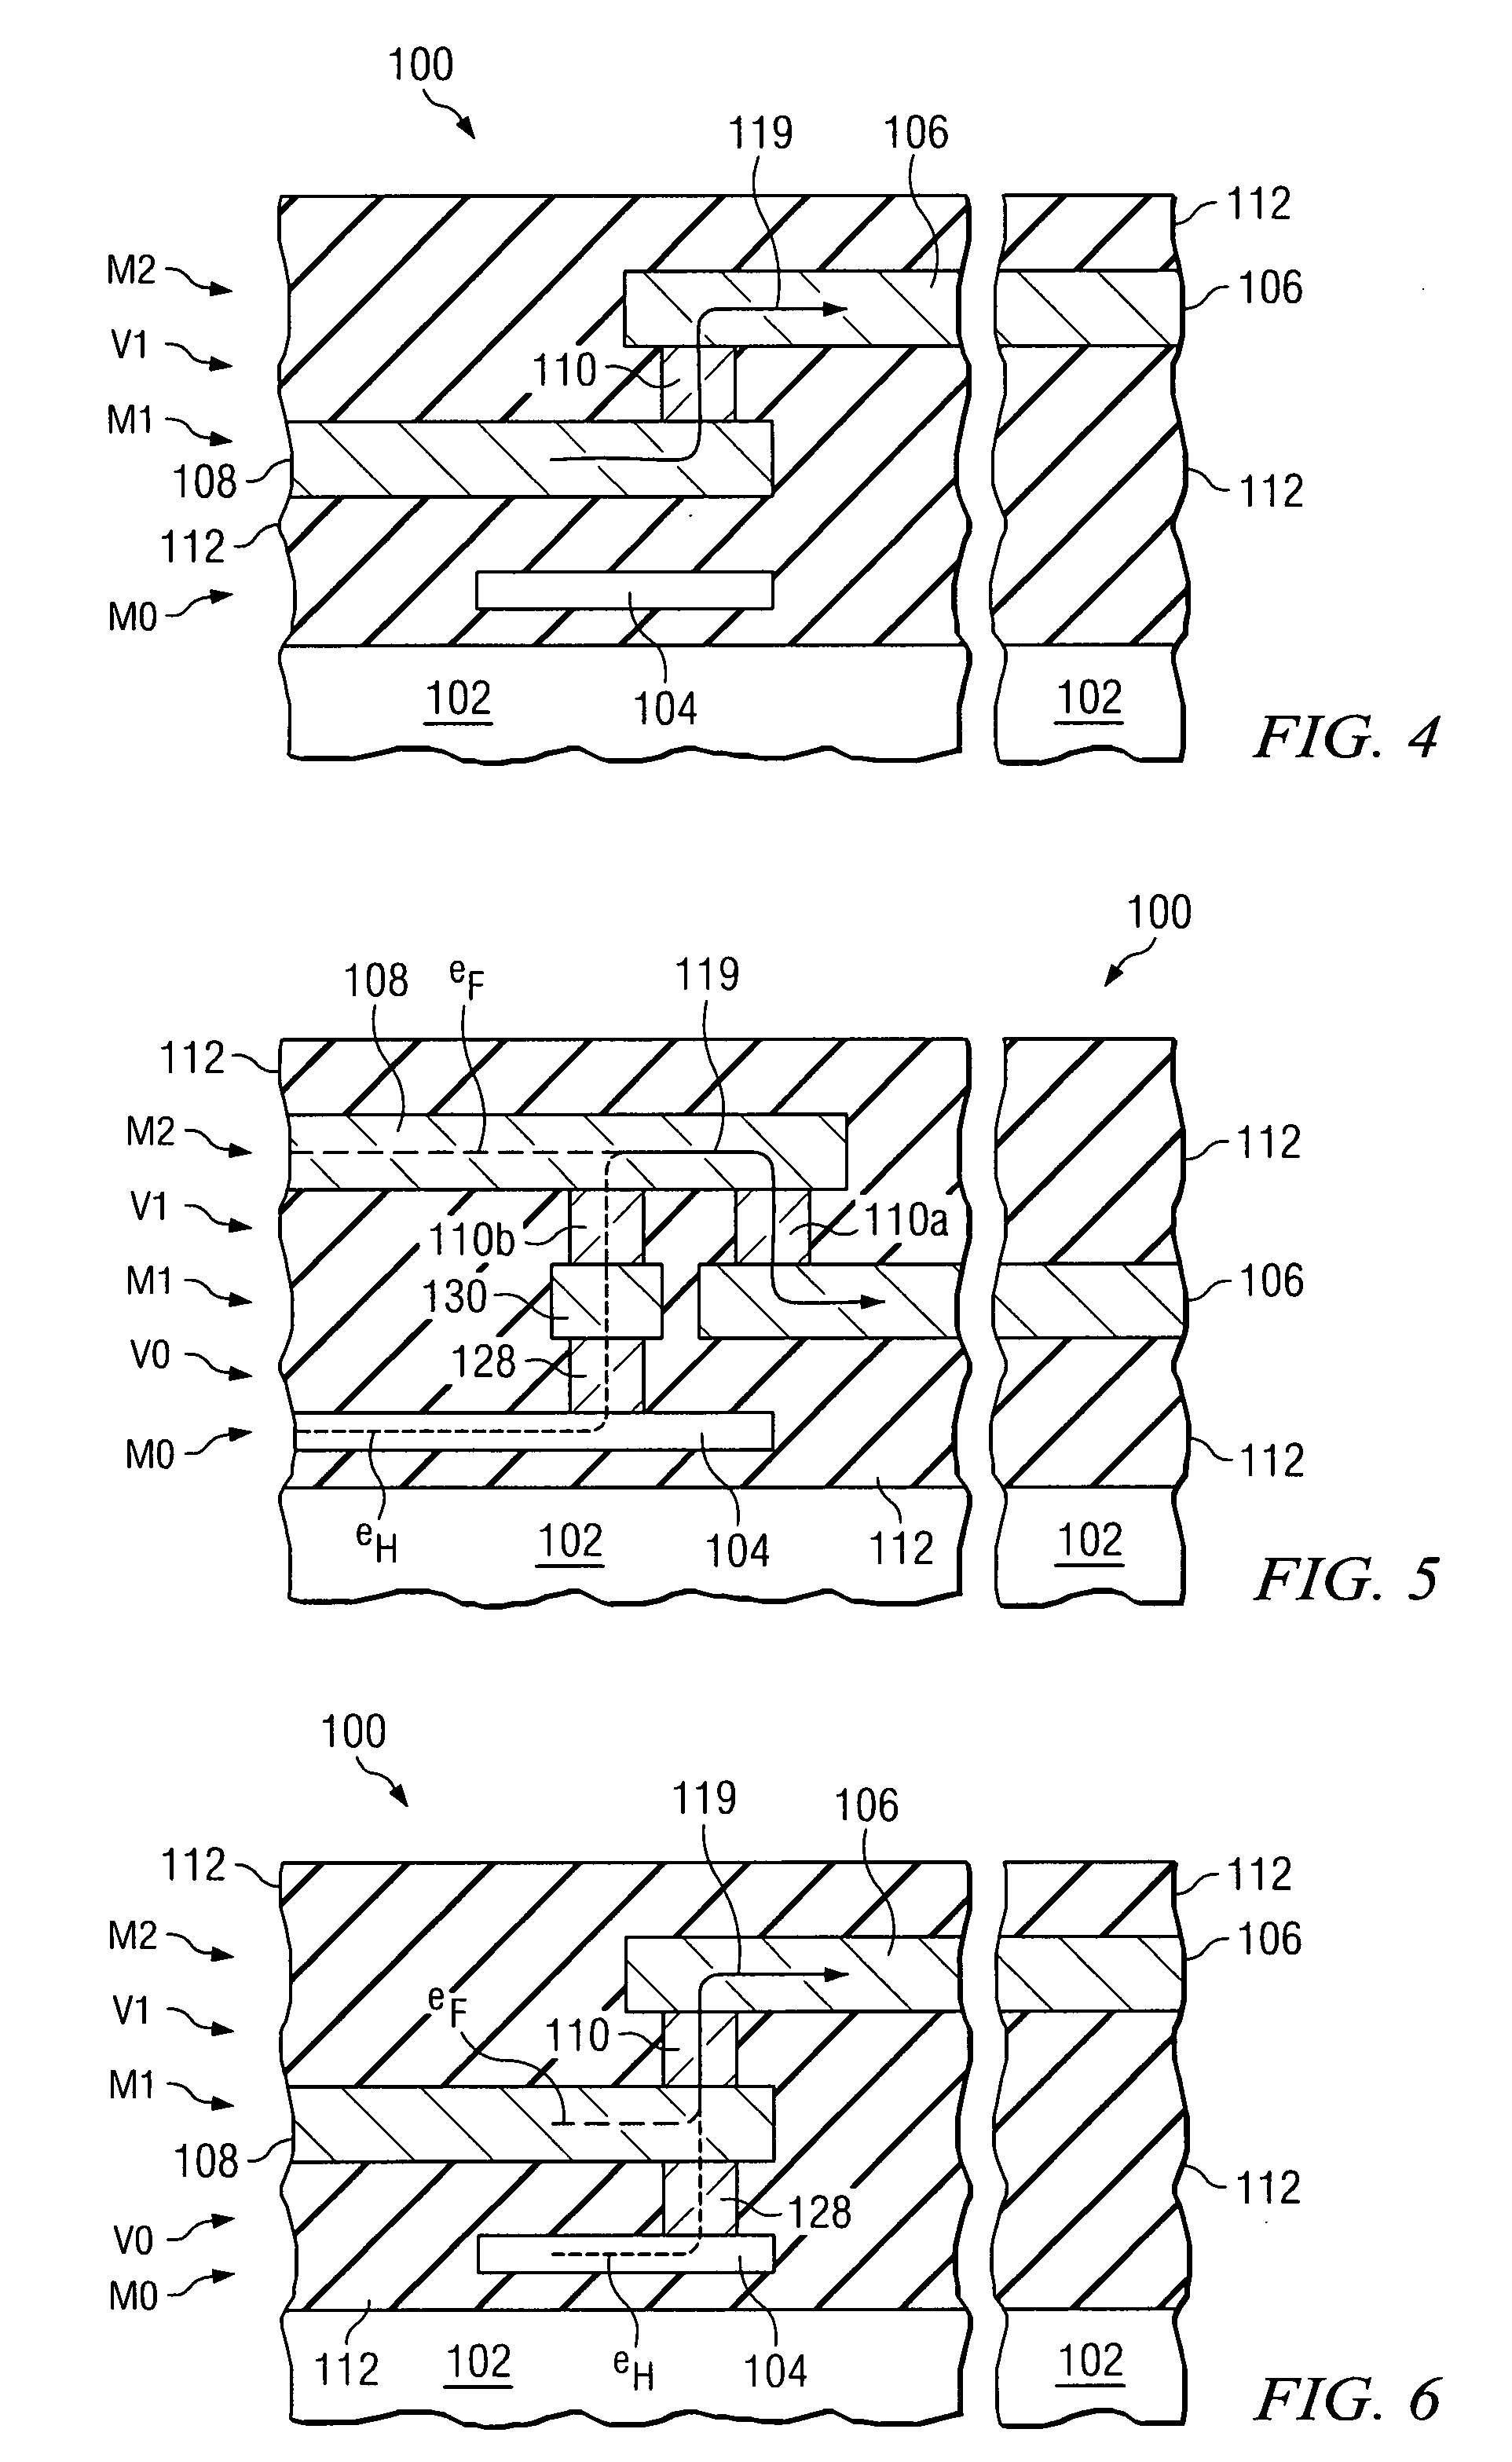 Semiconductor device test structures and methods